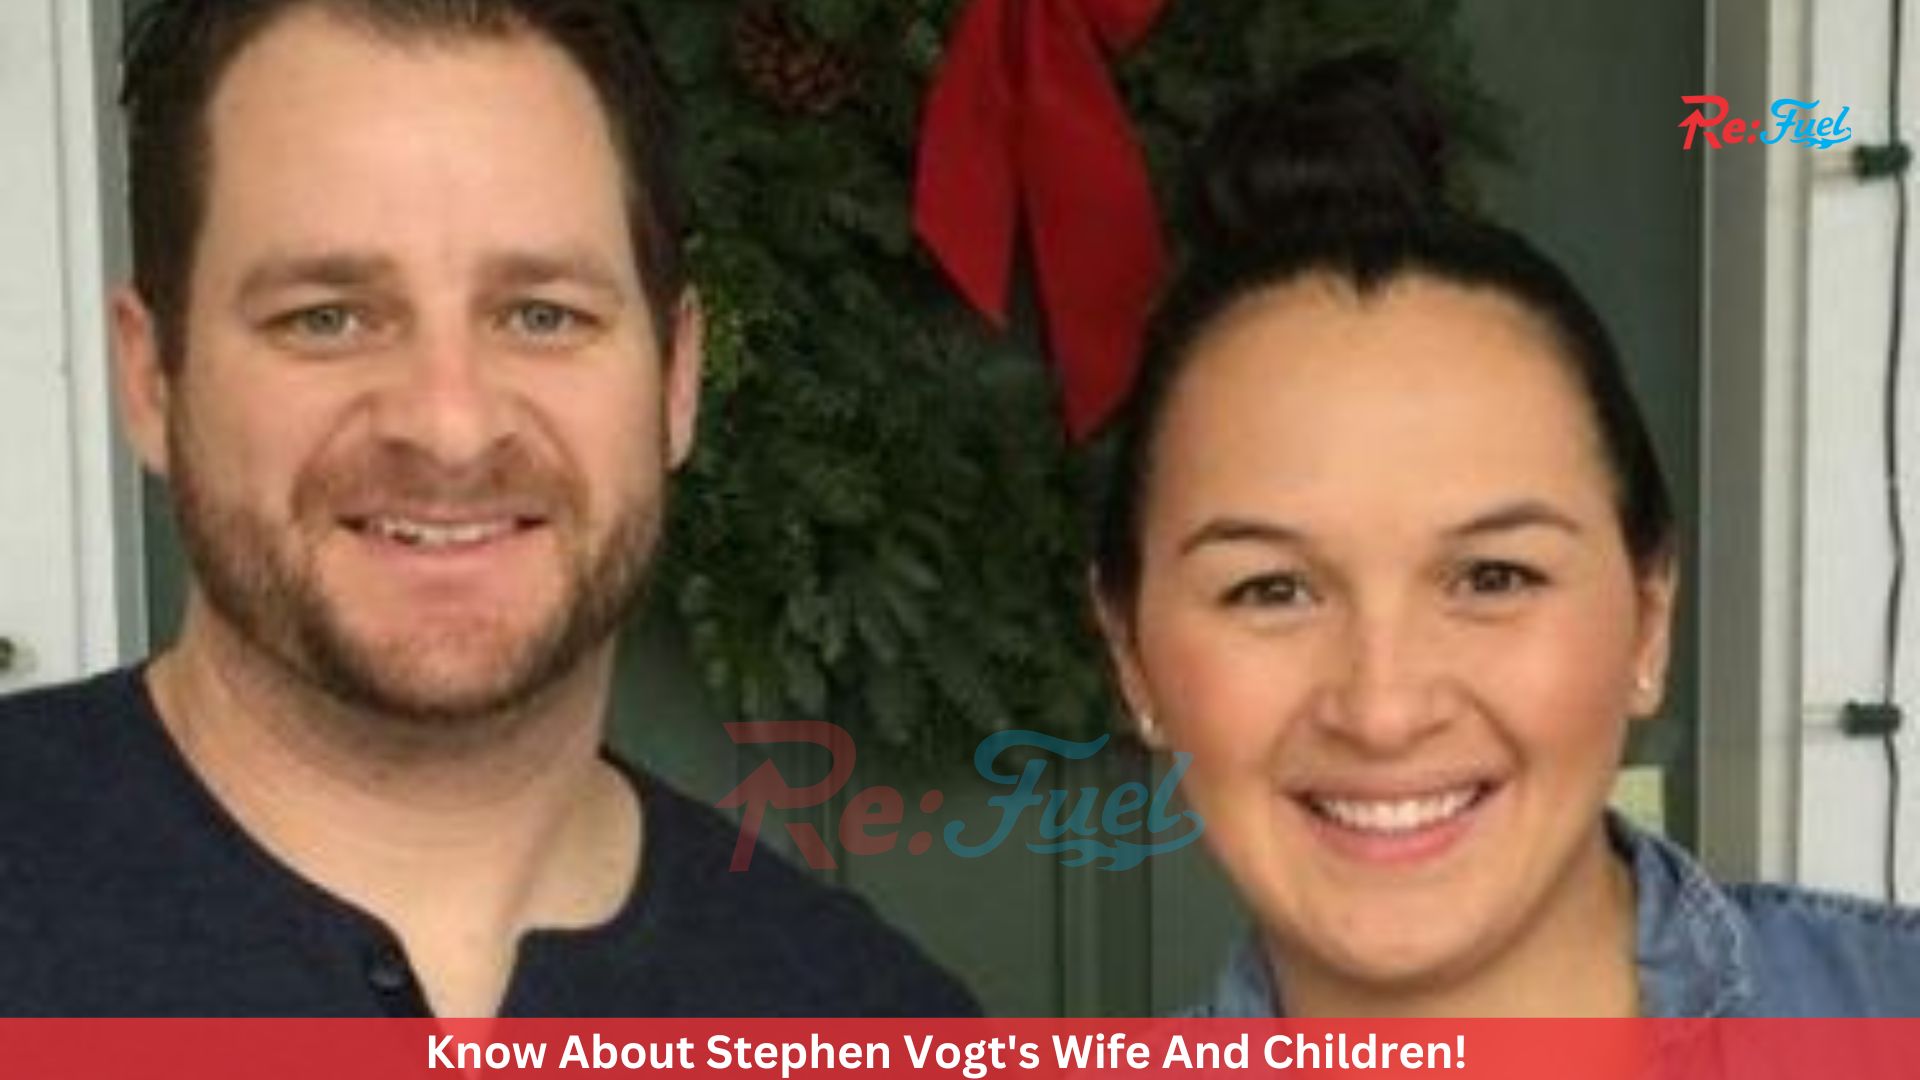 Know About Stephen Vogt's Wife And Children!